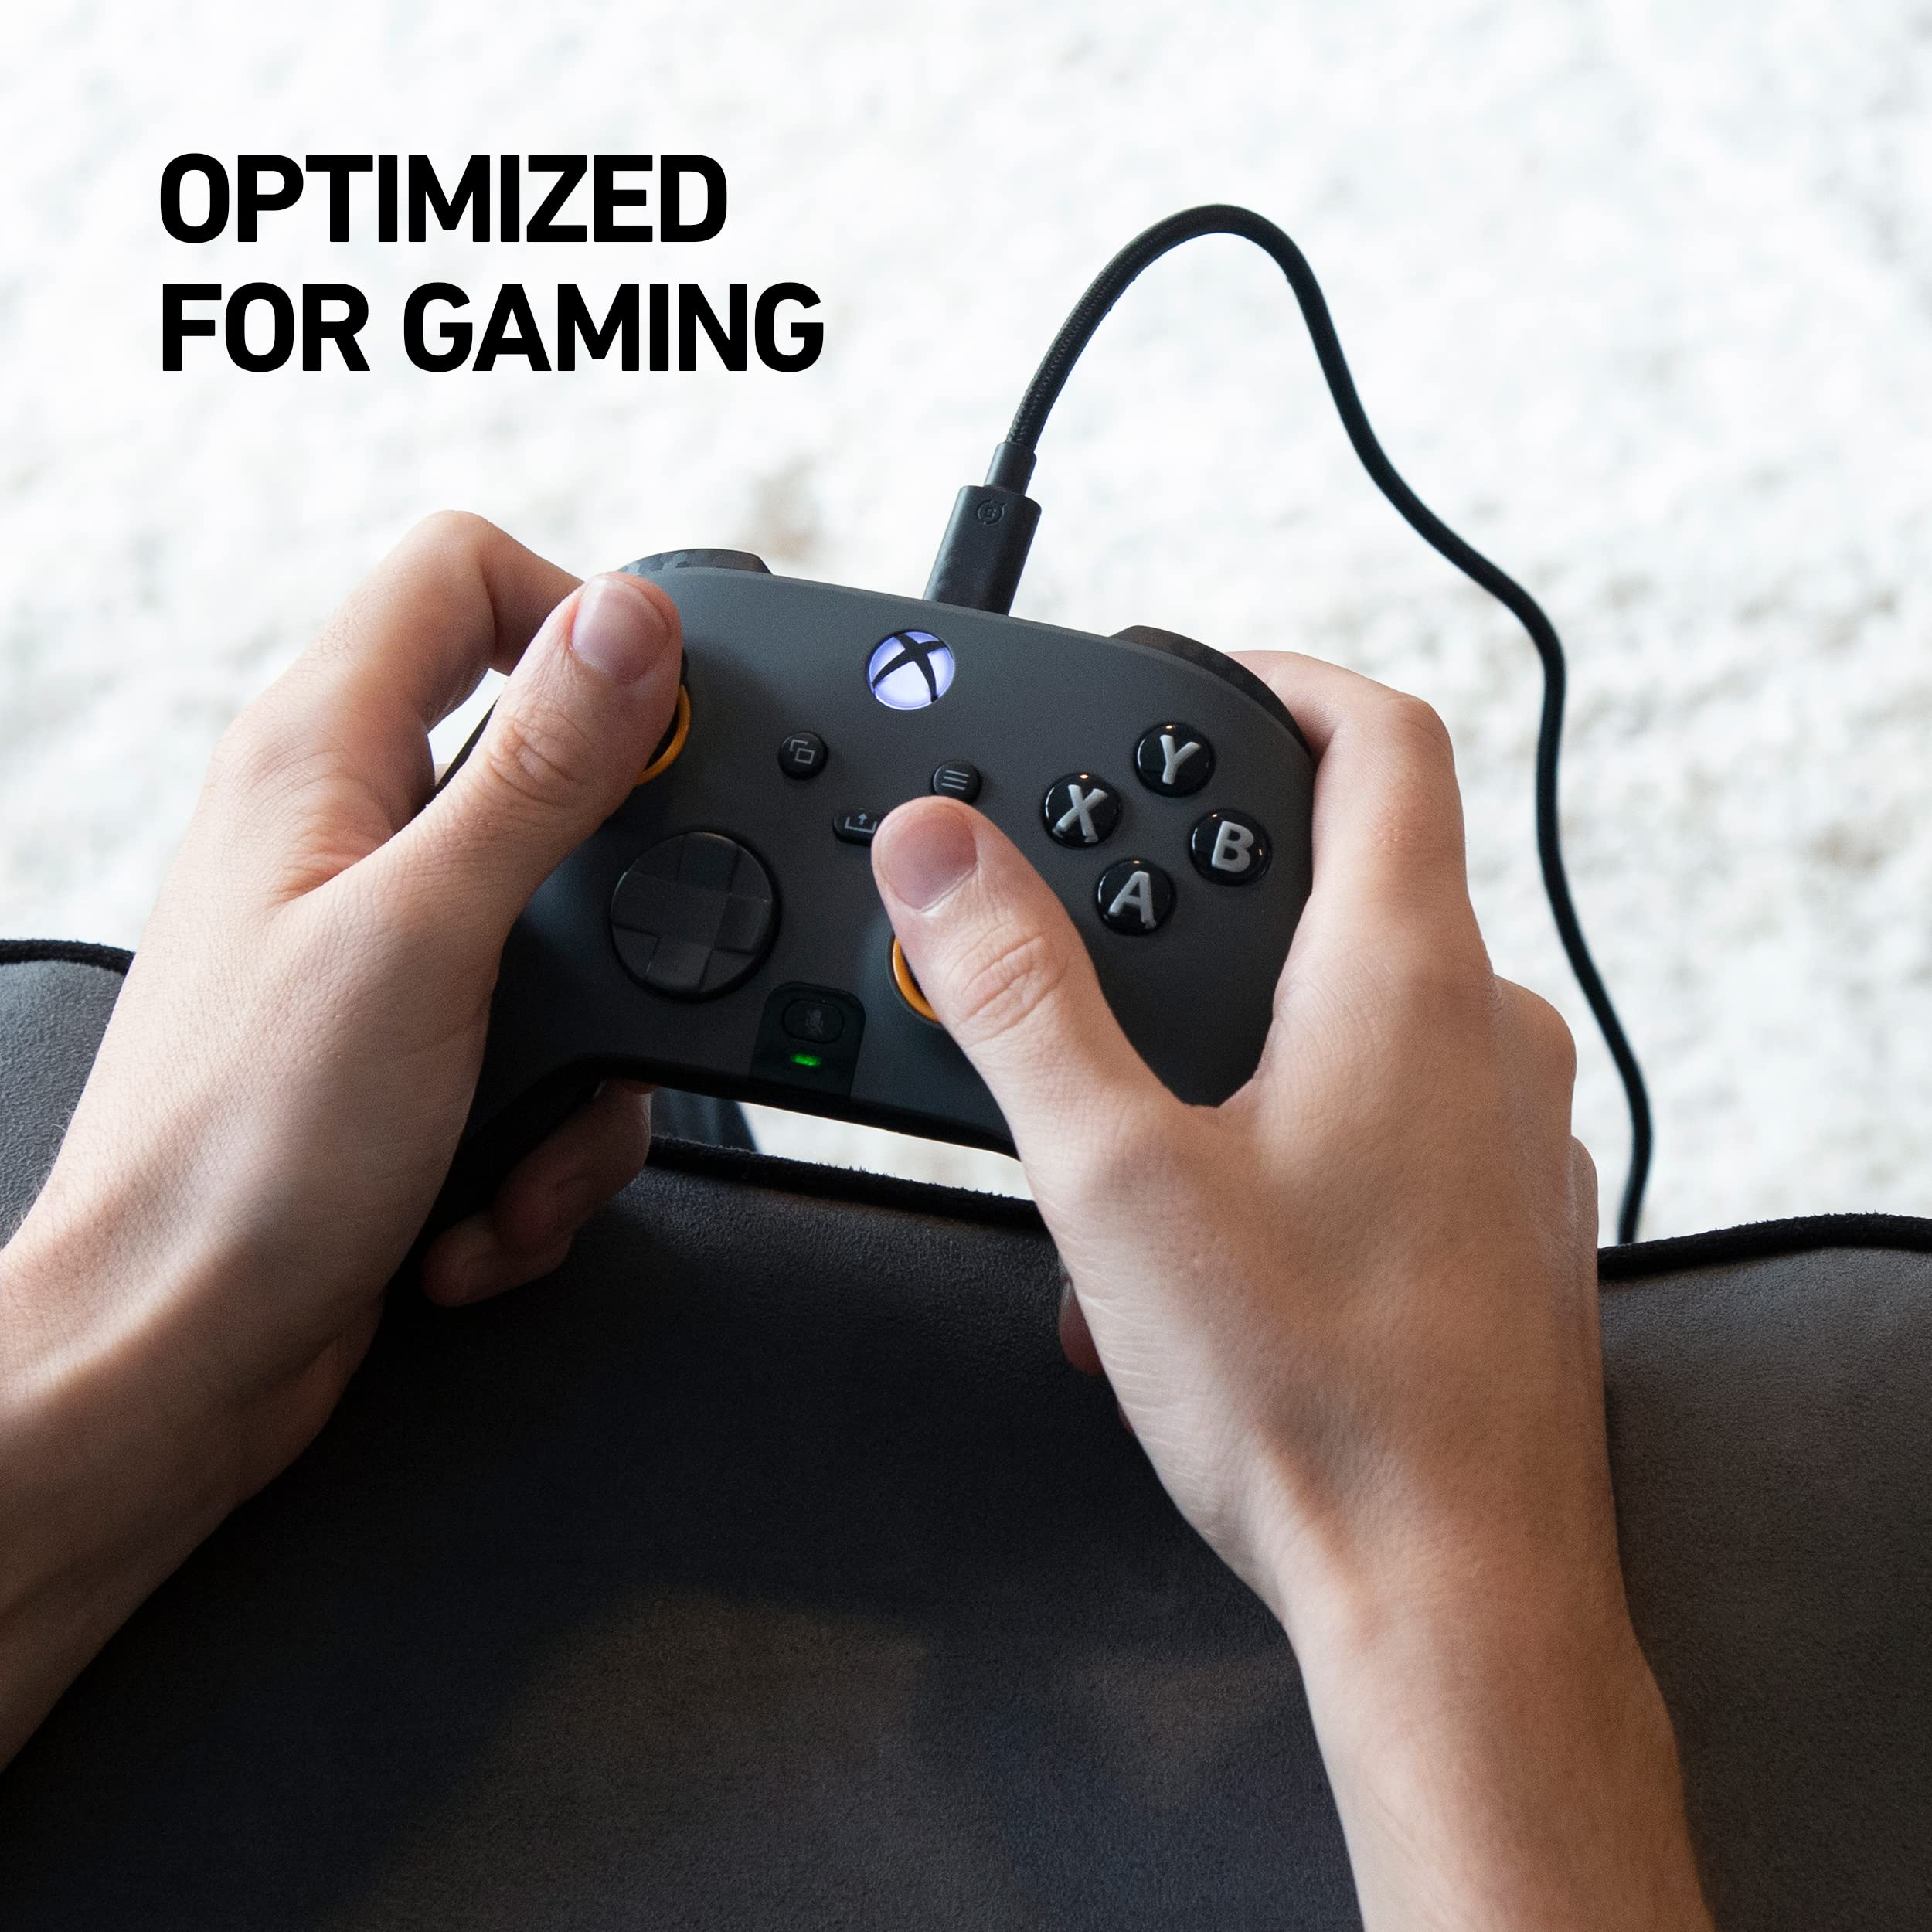 SCUF Braided USB-C Cable - Black 6 feet / 2 Meters USB Type C Connection and Charging for Xbox Controllers, PS5 Controllers, and Smart Phones - Xbox Series X;